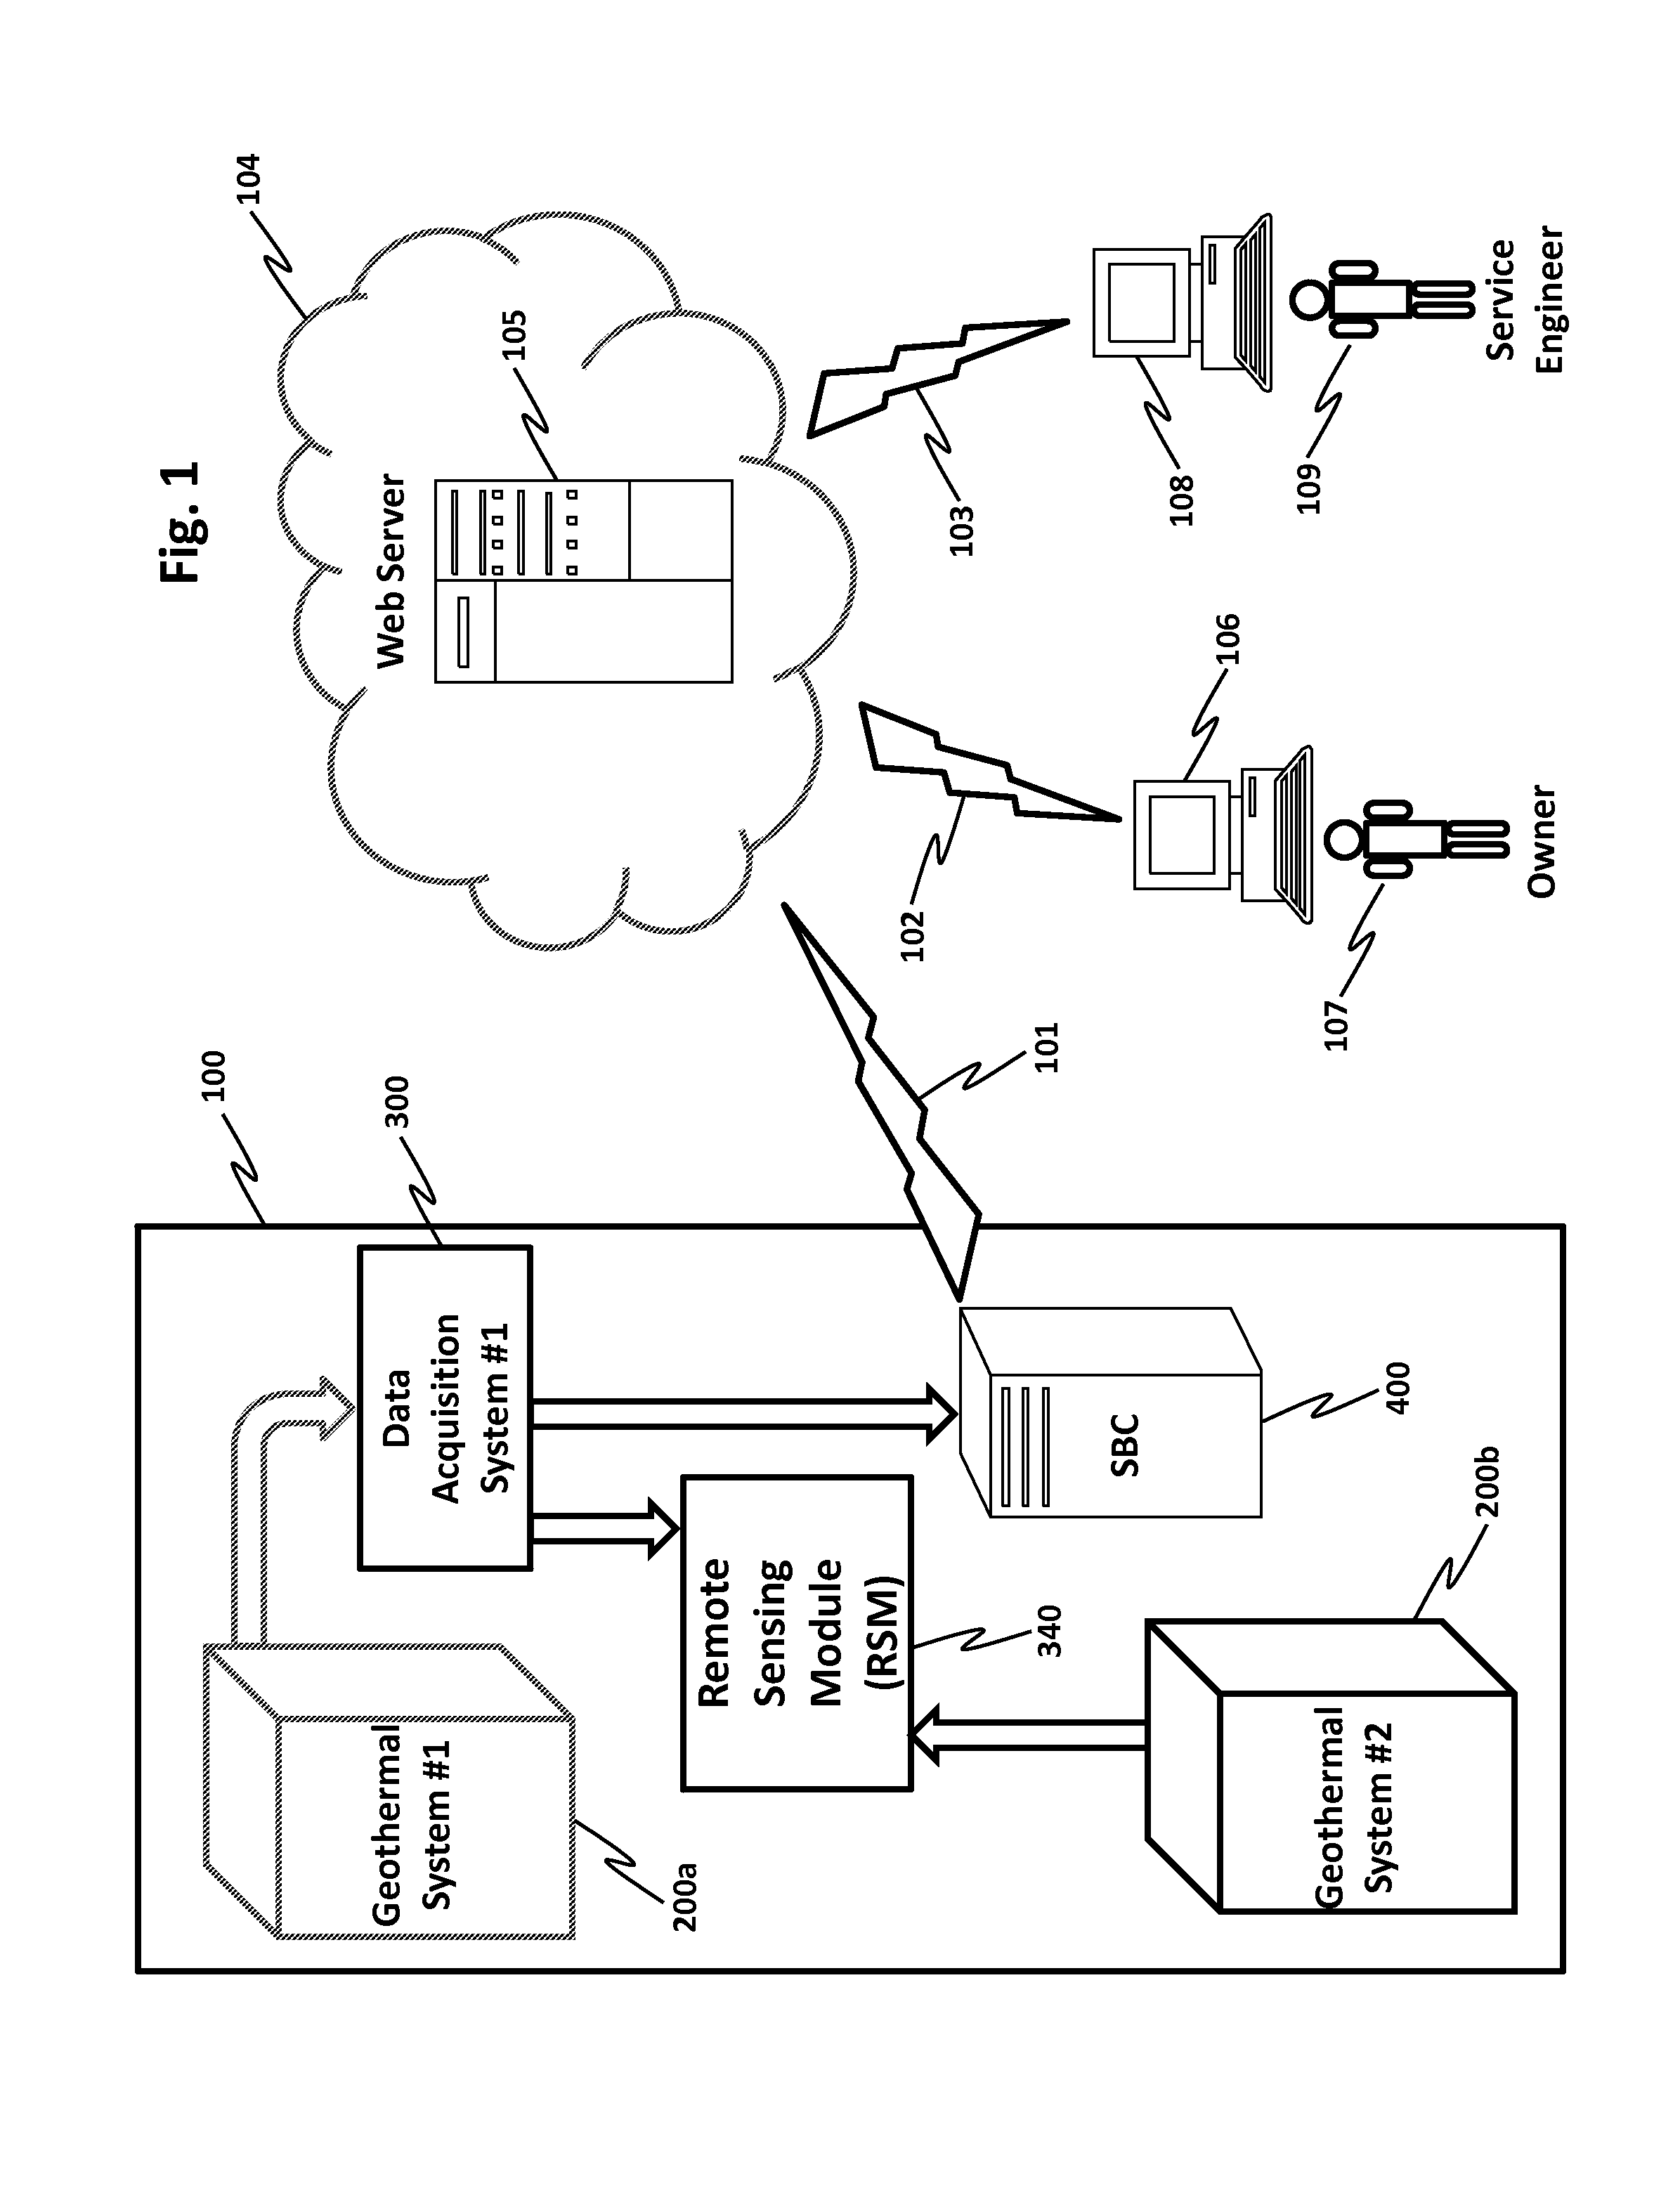 System and method for monitoring geothermal heat transfer system performance